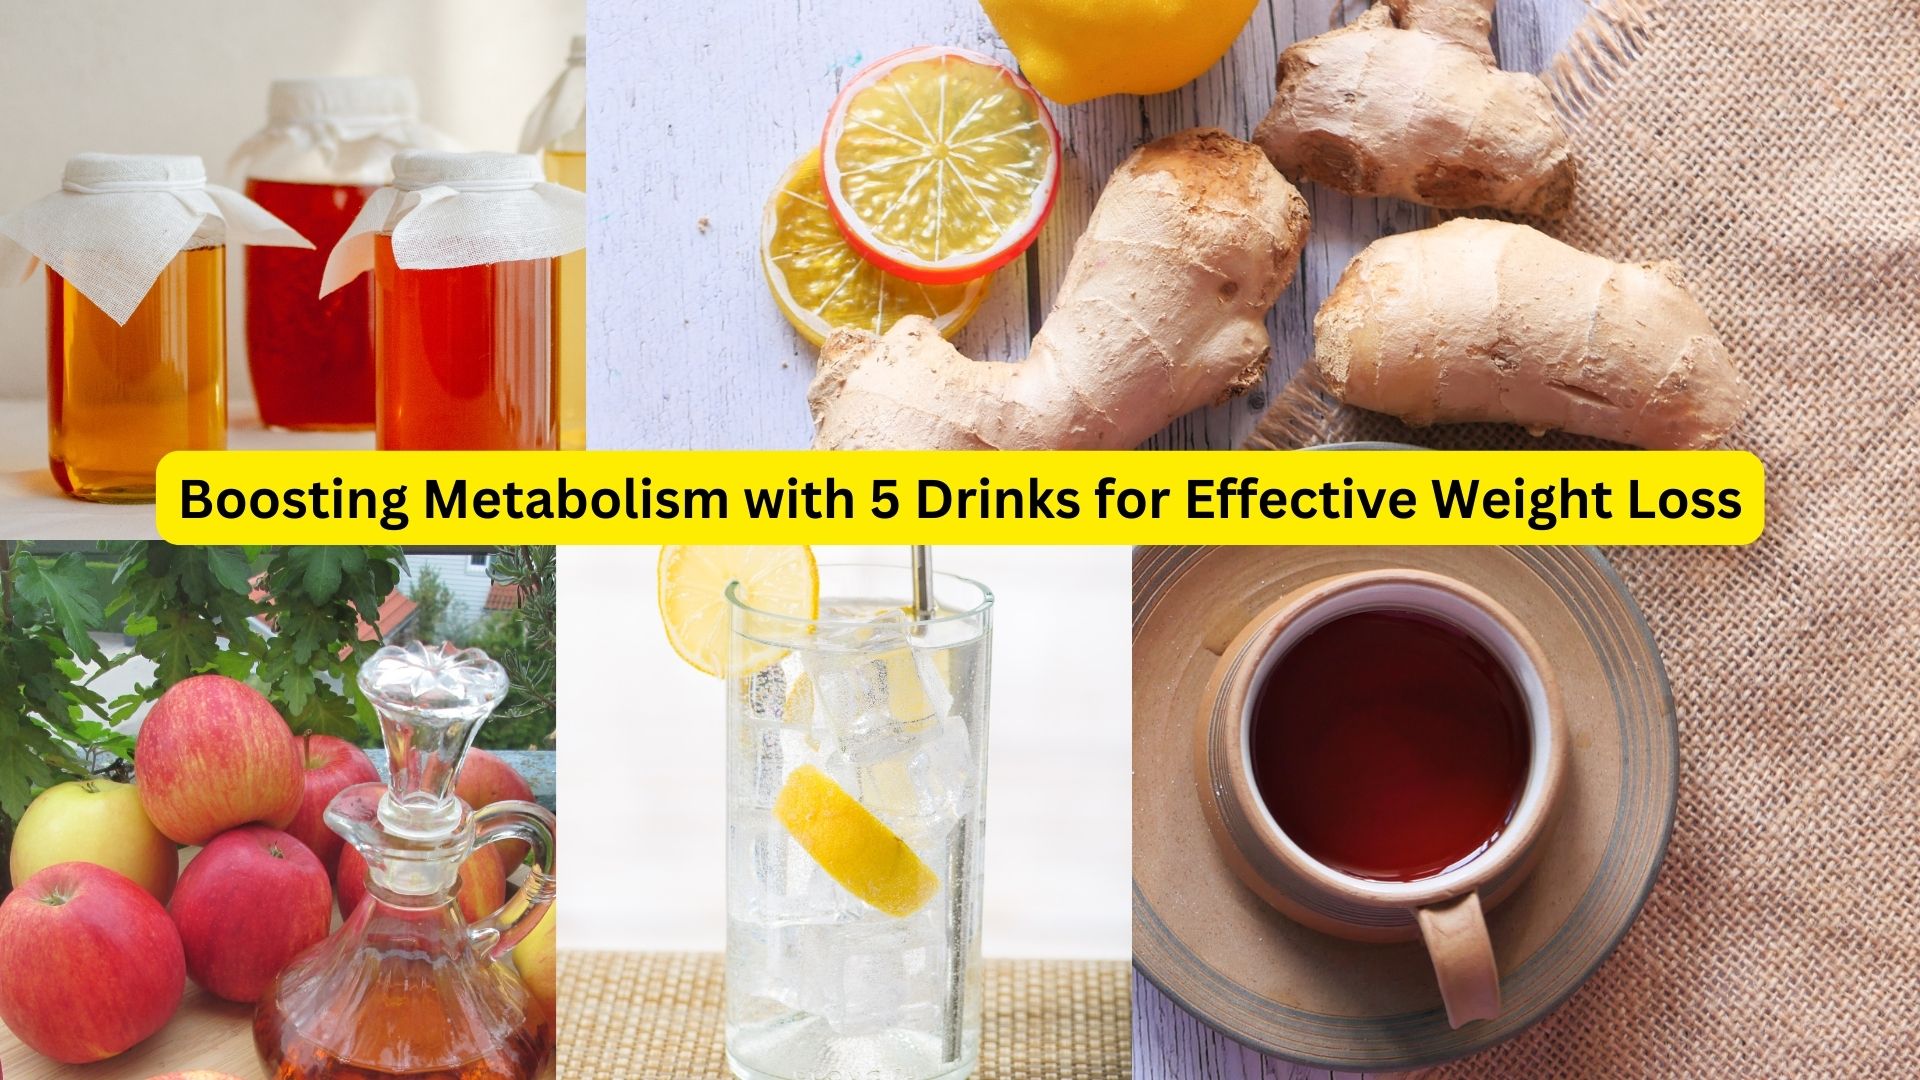 Boosting Metabolism with 5 Drinks for Effective Weight Loss